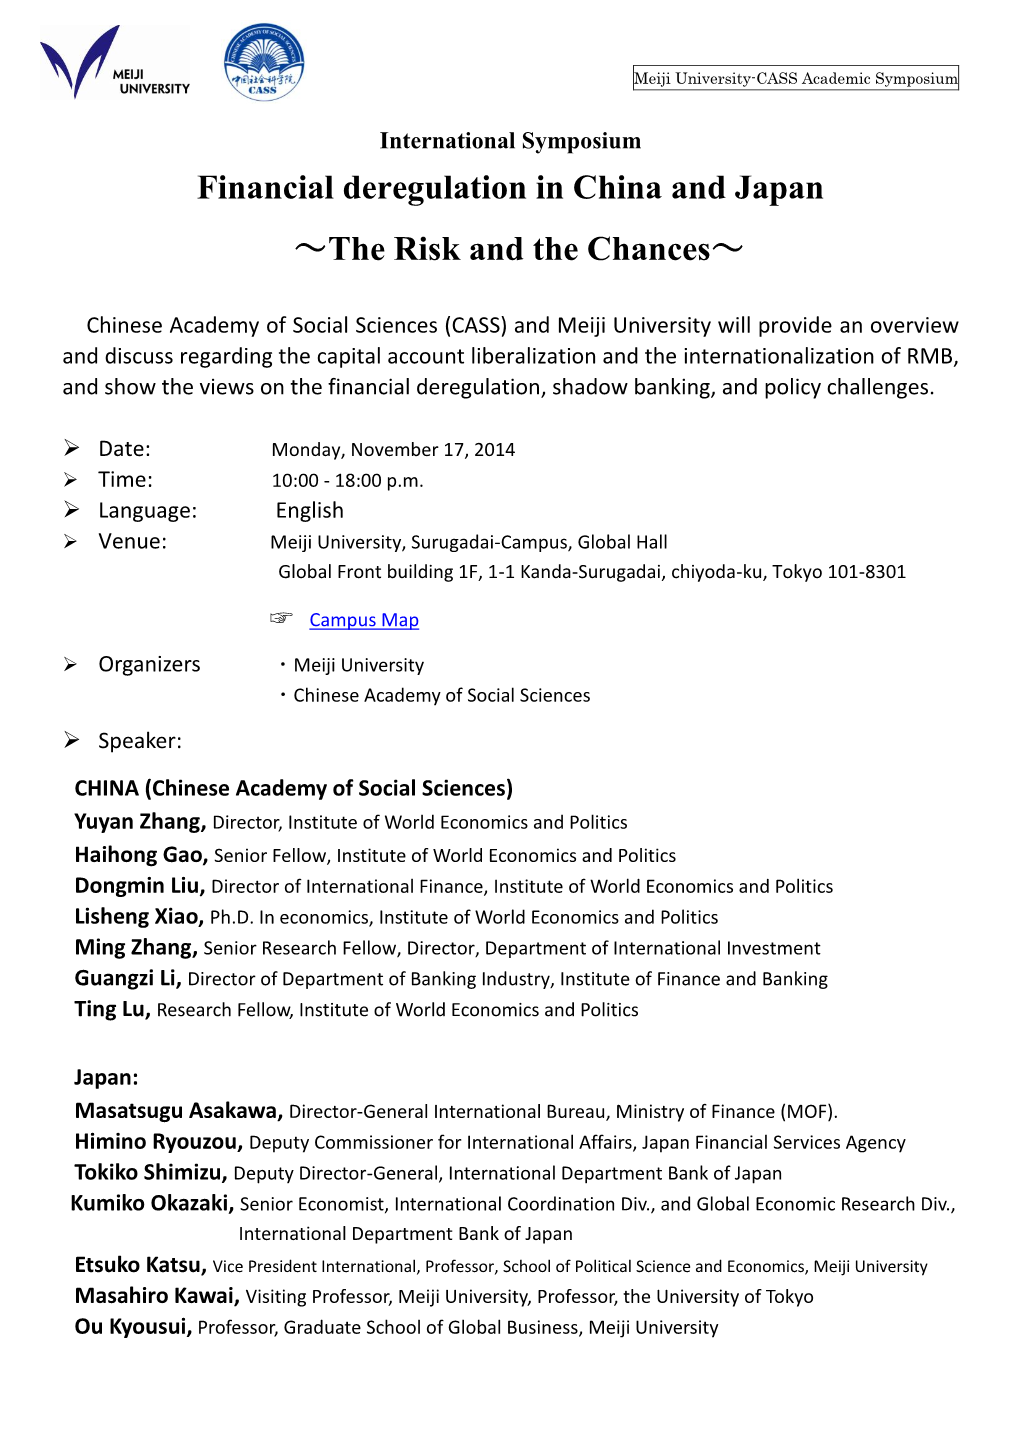 Nov. 05, 2014 EVENT Financial Deregulation in China and Japan